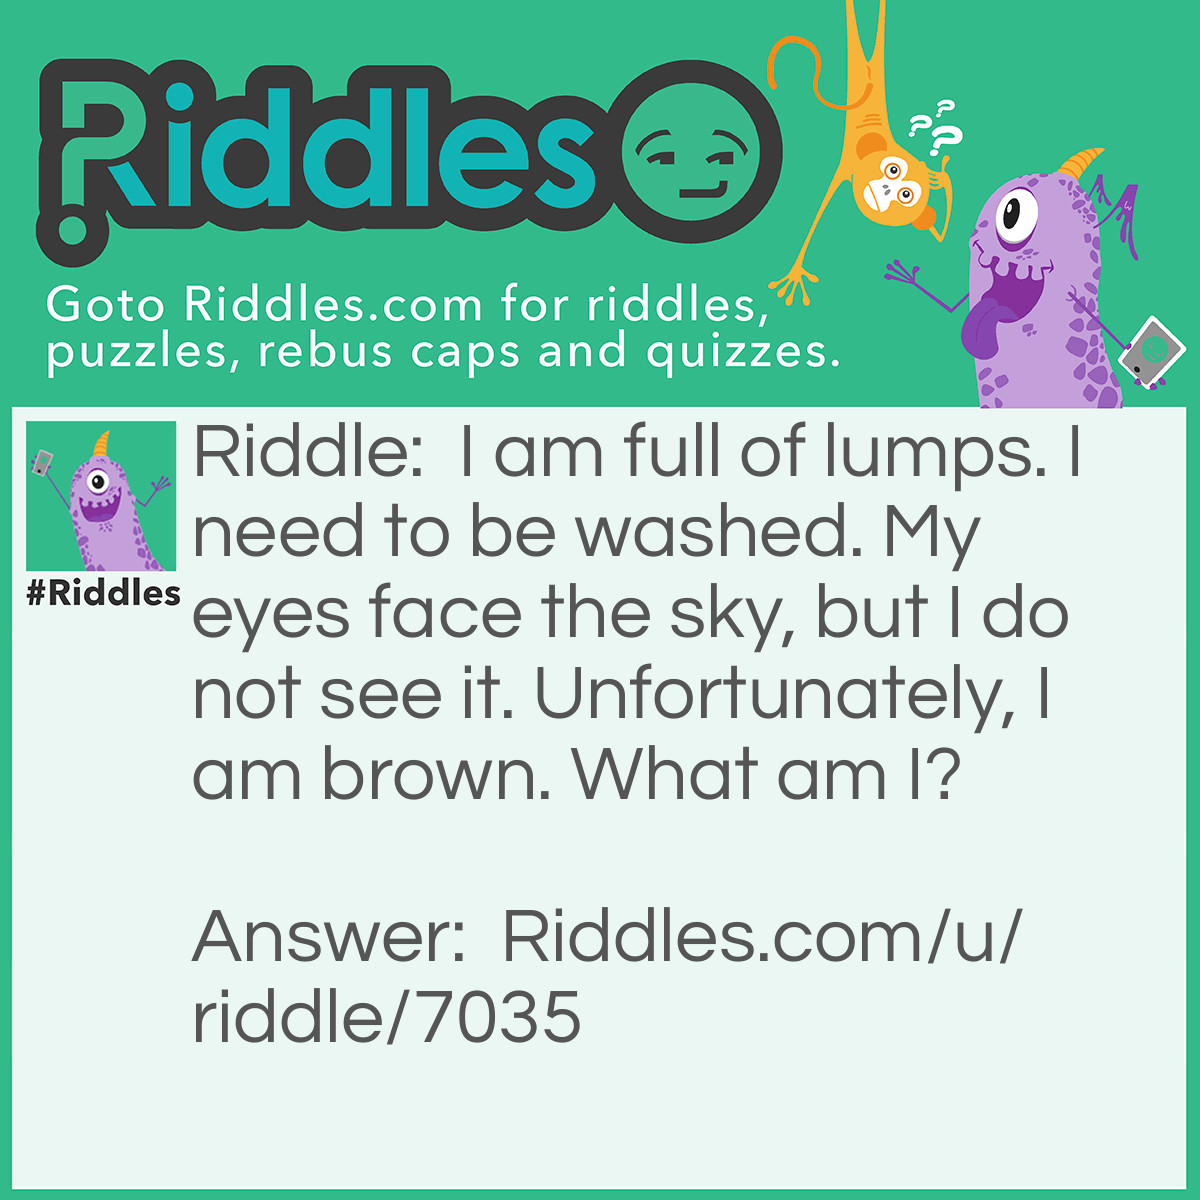 Riddle: I am full of lumps. I need to be washed. My eyes face the sky, but I do not see it. Unfortunately, I am brown. What am I? Answer: An open bin of potatoes